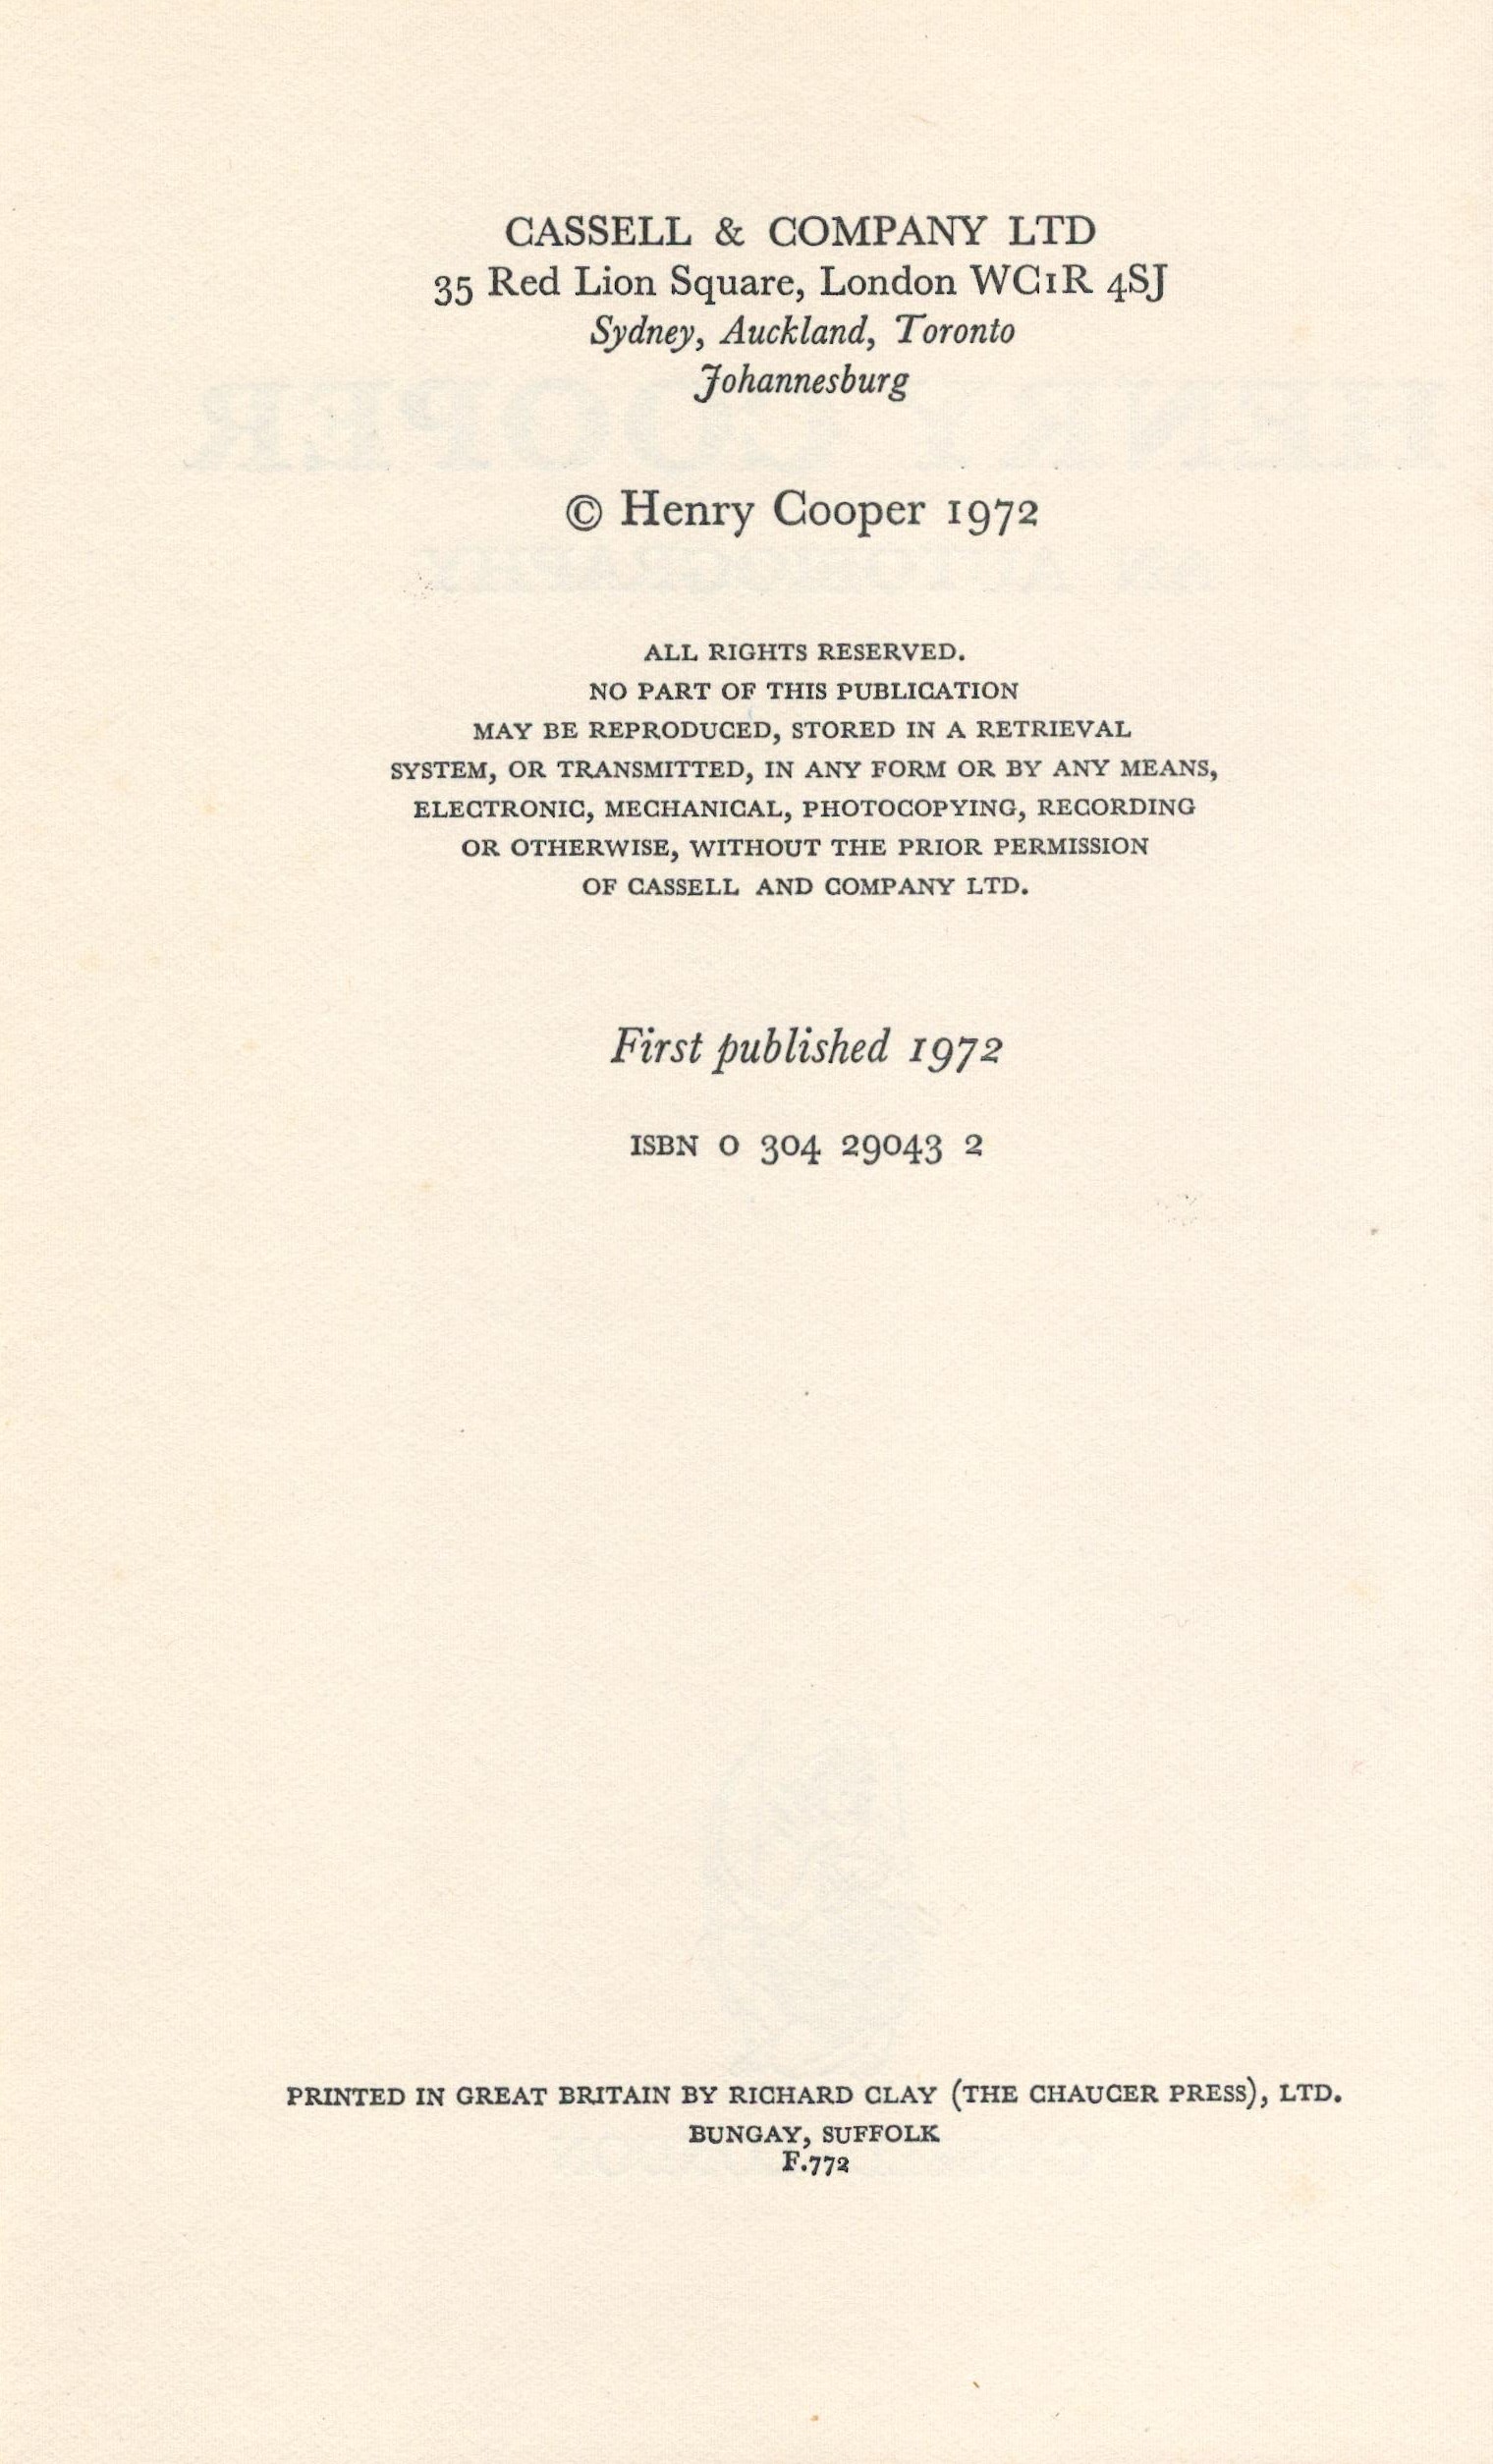 Henry Cooper - An Autobiography First Edition 1972 Hardback Book published by Cassell and Co Ltd - Image 3 of 3